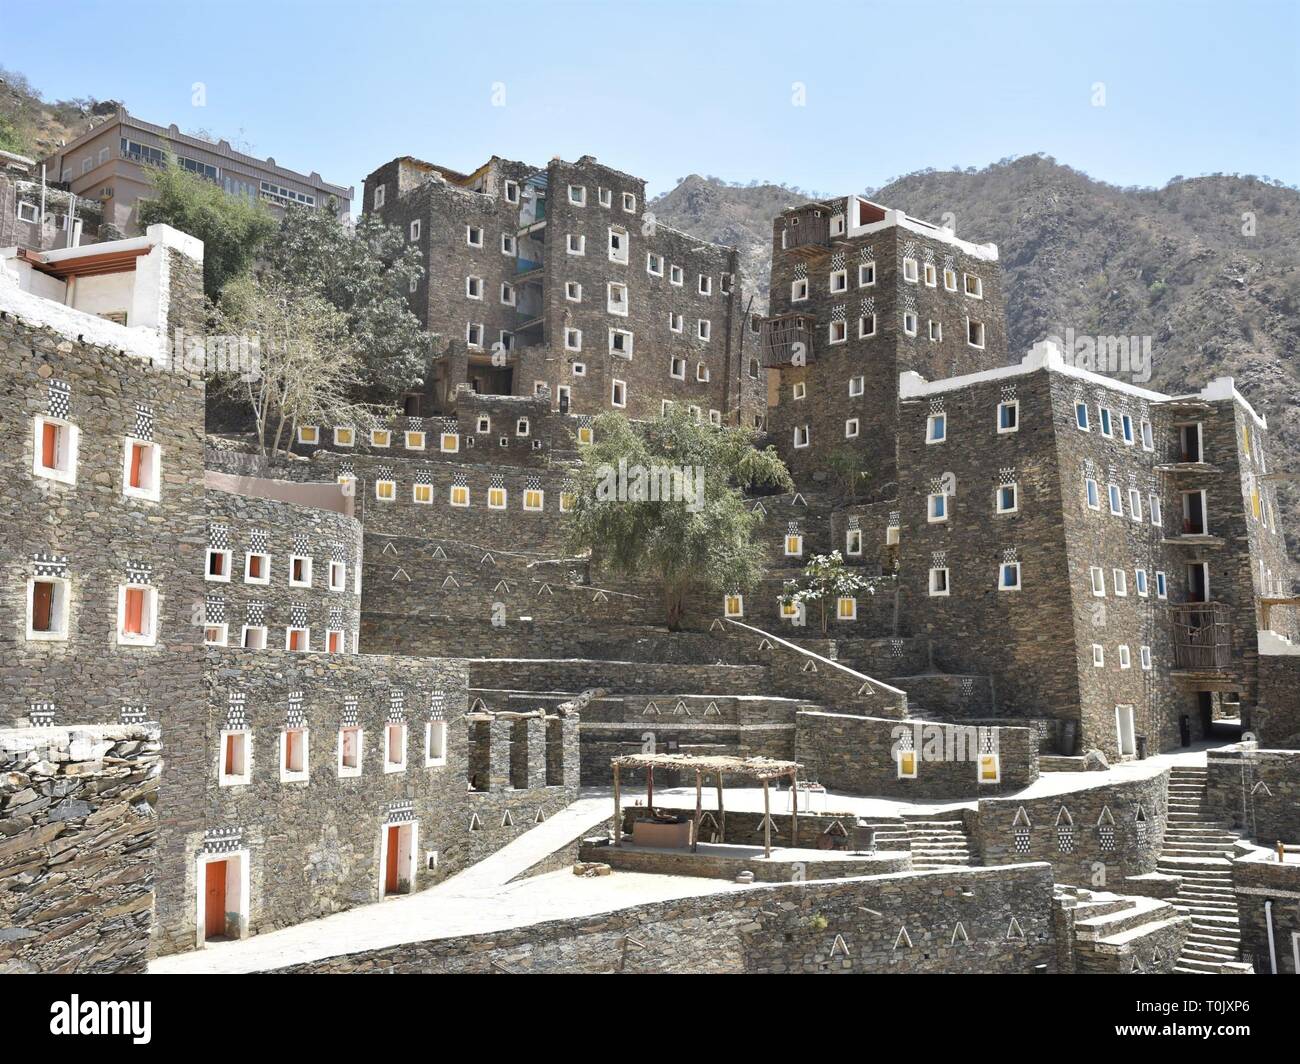 Abha, Saudi Arabia. 20th Mar, 2019. The photo taken on March 20, 2019 shows the Rijal Almaa village, west of Abha city, Asir Province, Saudi Arabia. Rijal Almaa is an ancient village which contains around 60 multiple-story buildings built of stone, clay and wood. Credit: Tu Yifan/Xinhua/Alamy Live News Stock Photo